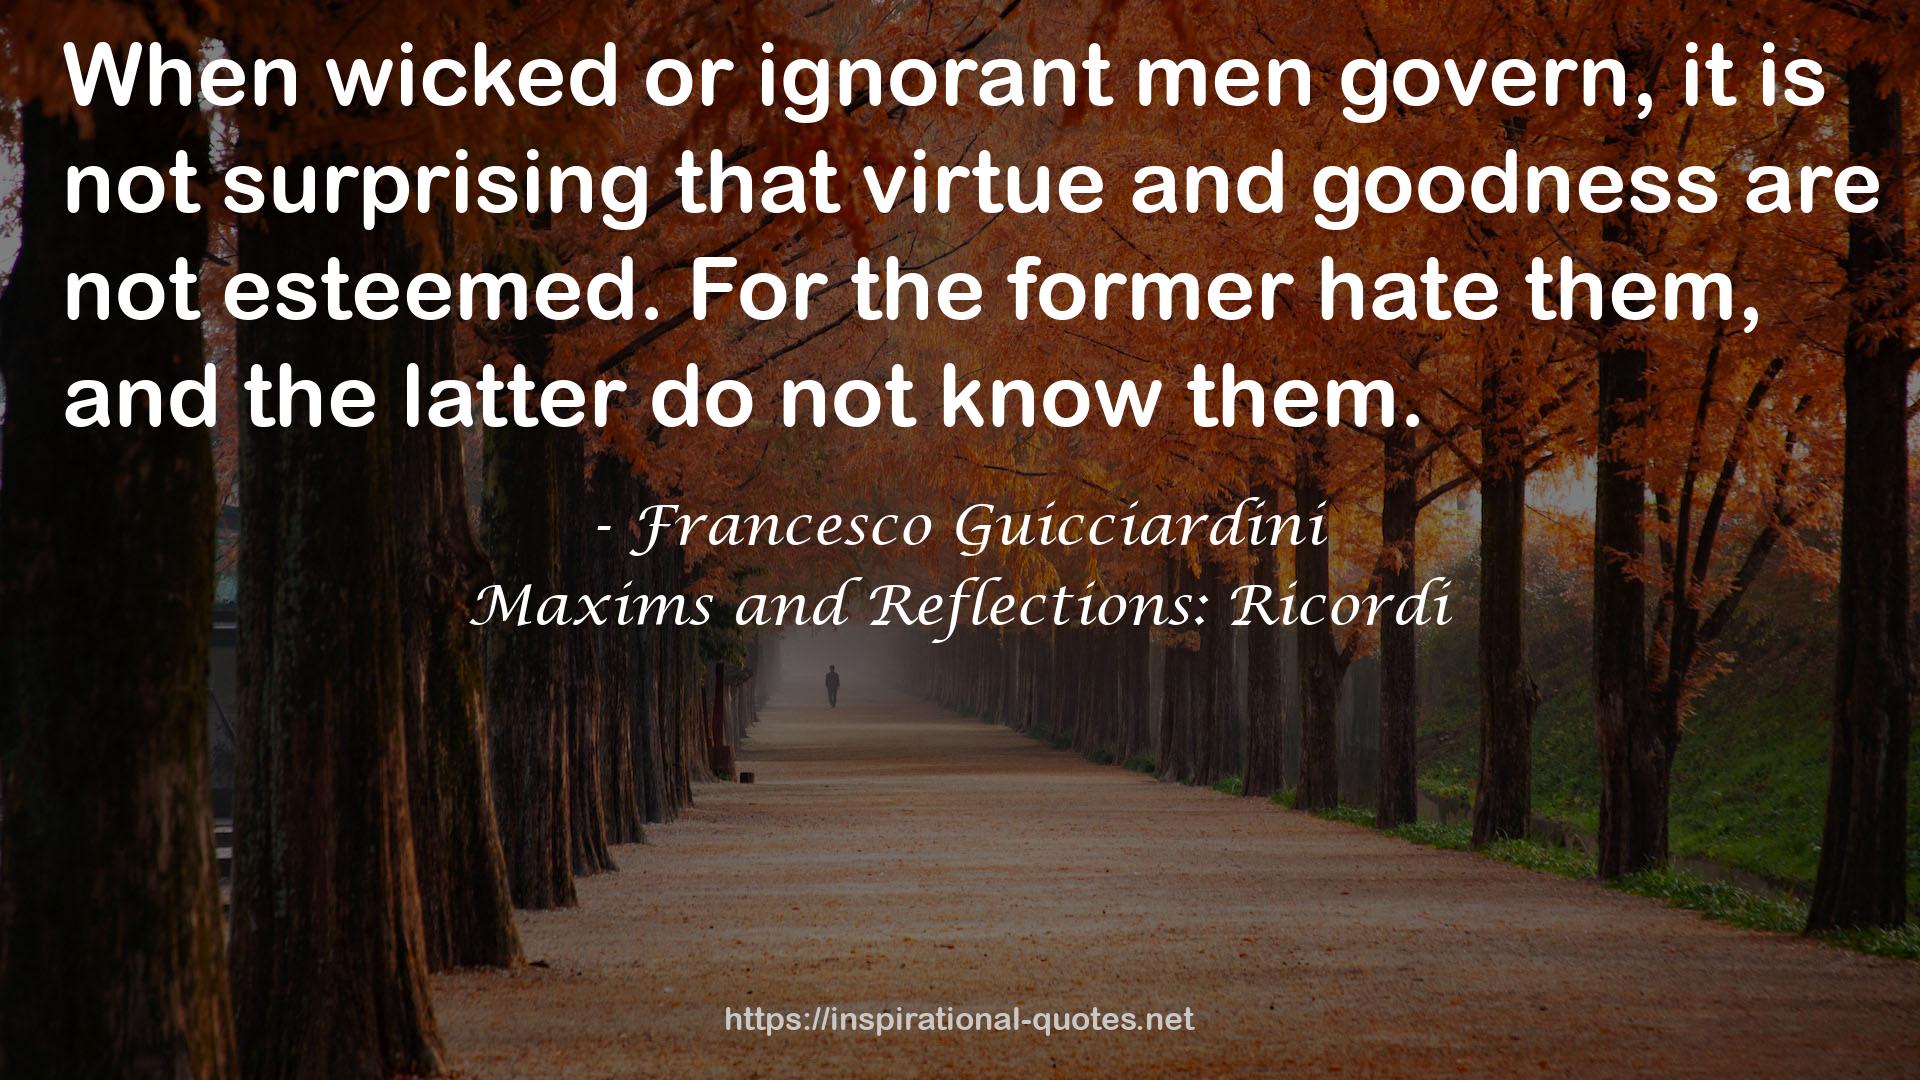 Maxims and Reflections: Ricordi QUOTES